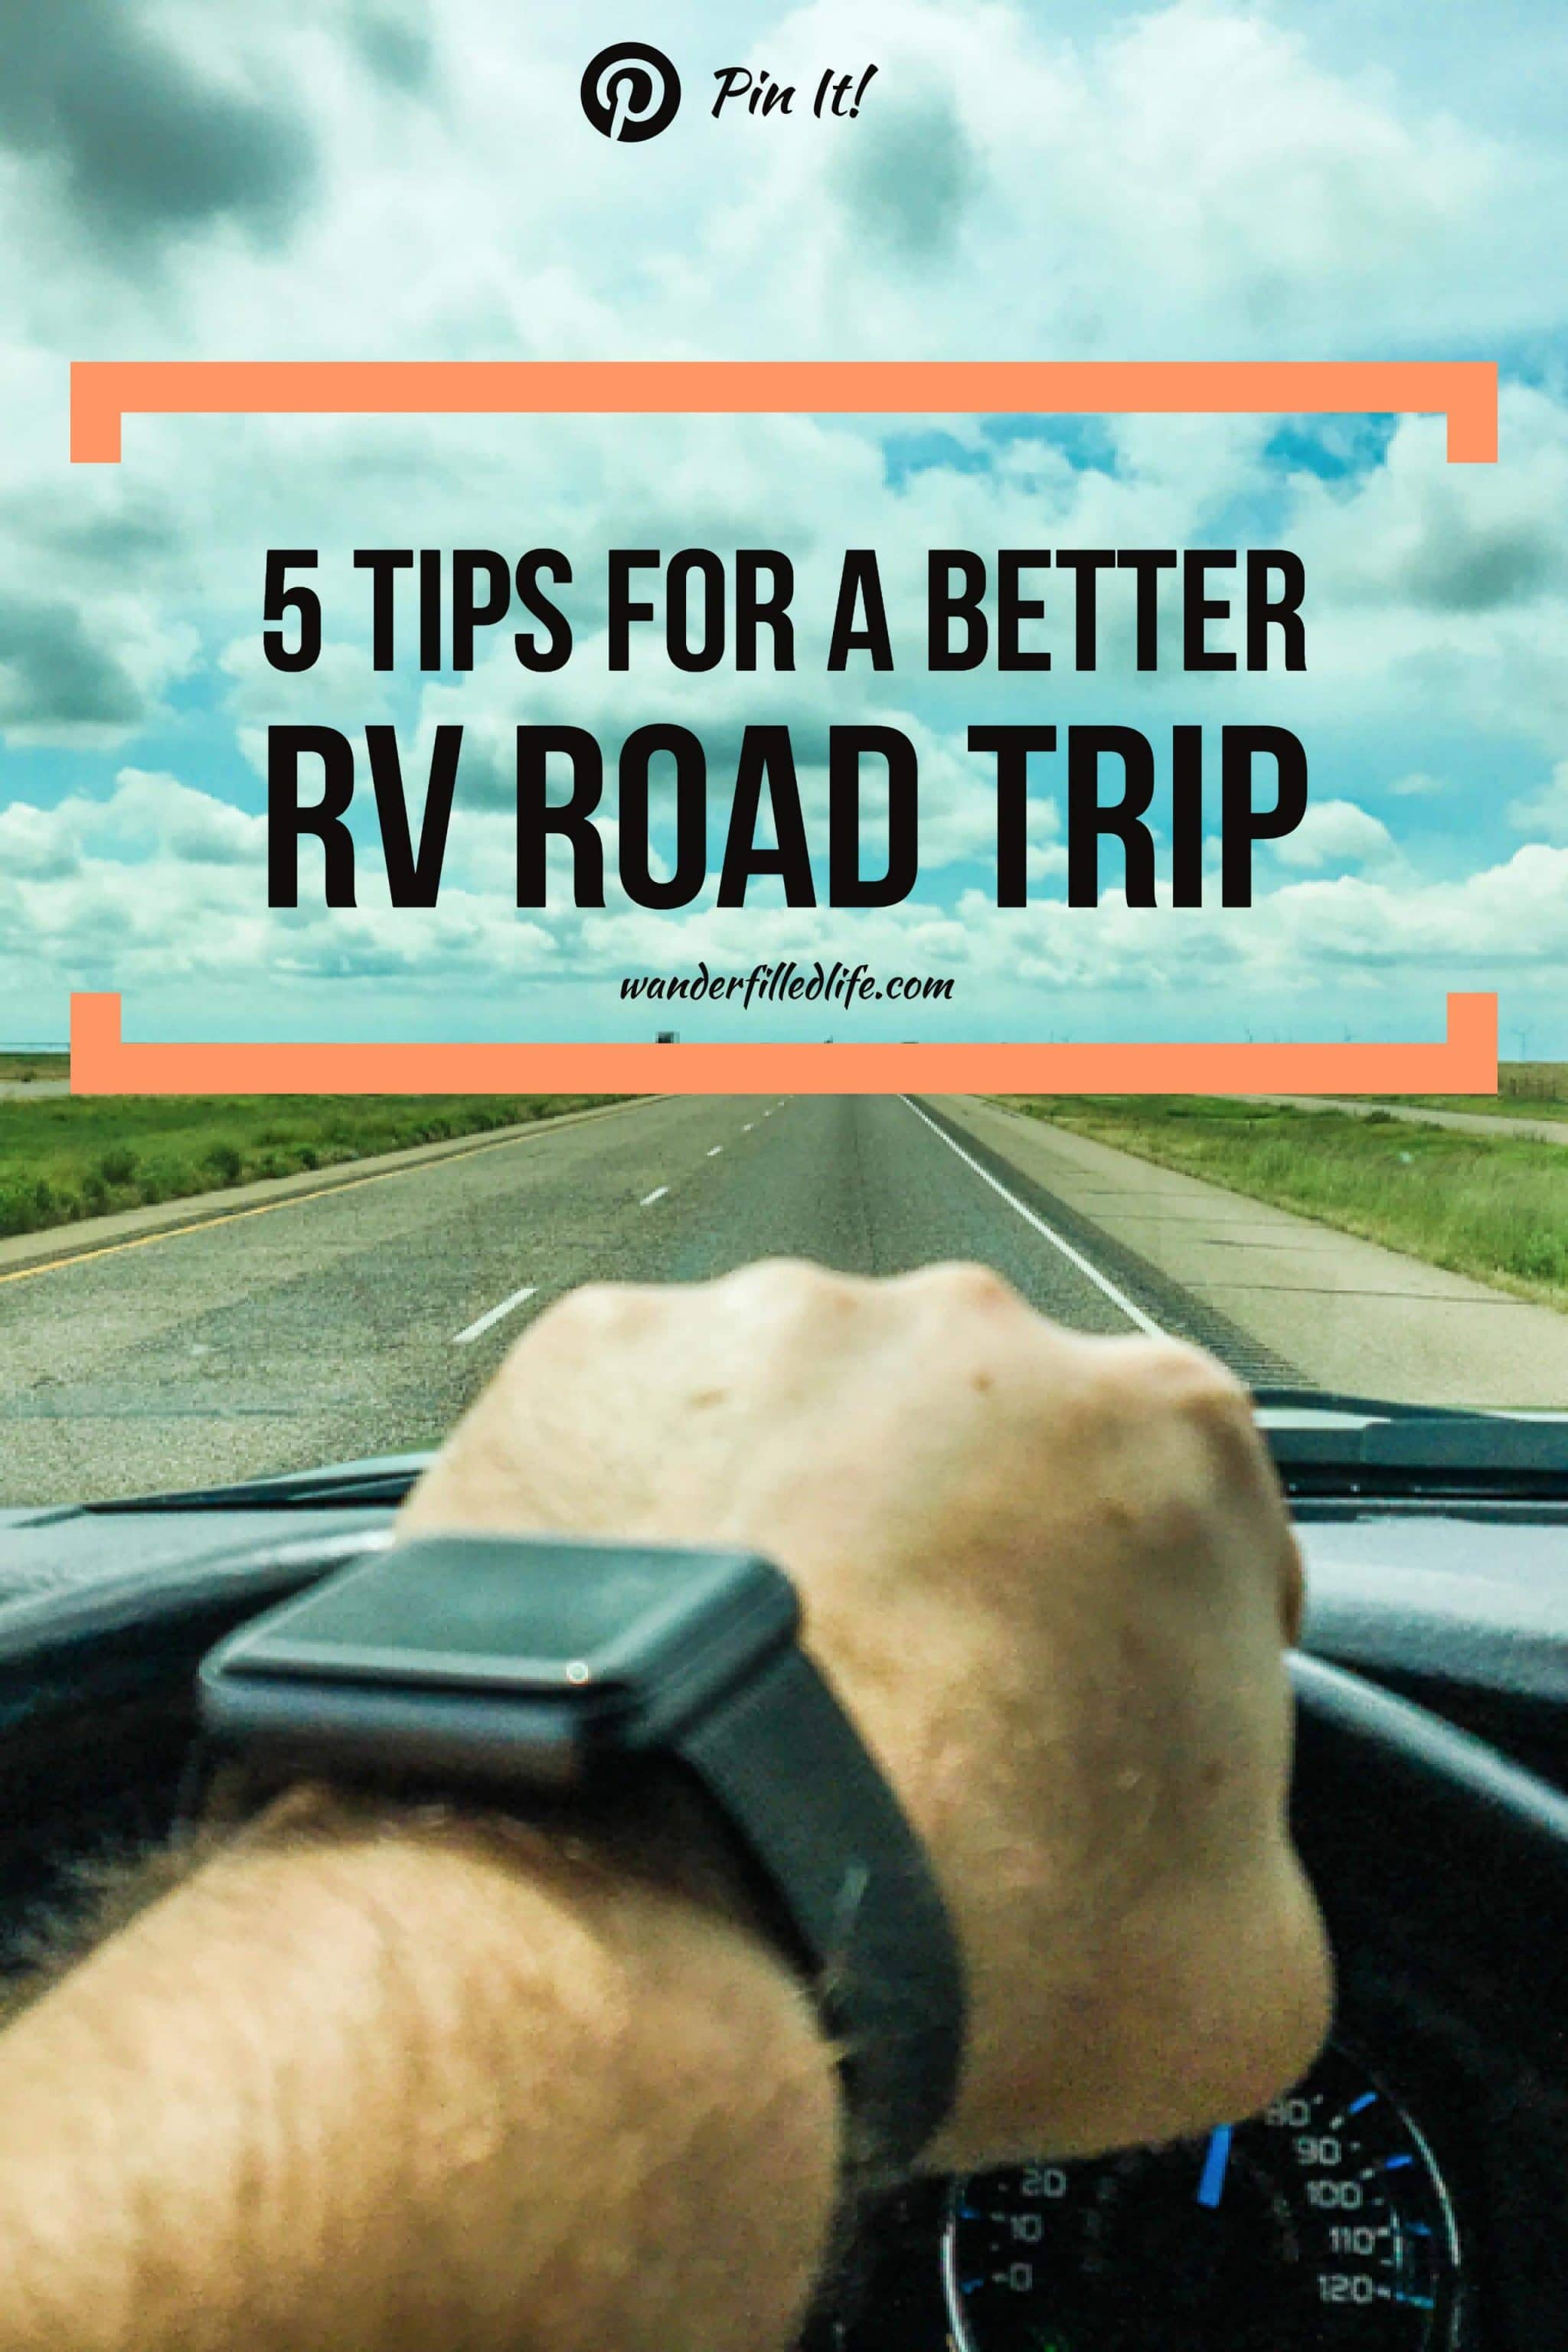 From choosing a spot for boondocking to RV repairs, learn from our mistakes this summer with these important RV road trip tips.